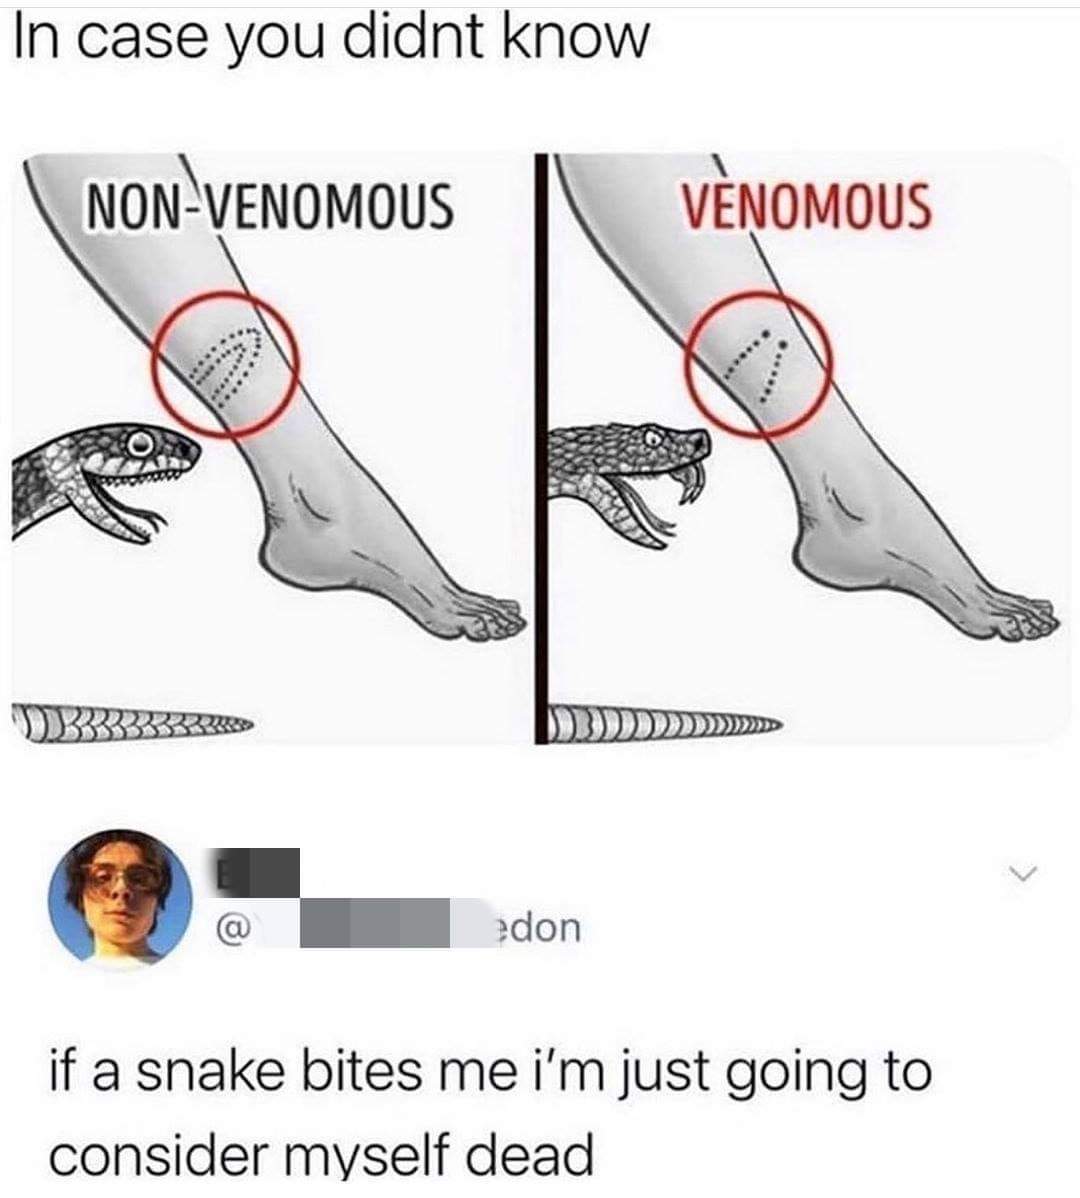 wilderness survival tips - In case you didnt know NonVenomous Venomous proved 0333333333 edon if a snake bites me i'm just going to consider myself dead